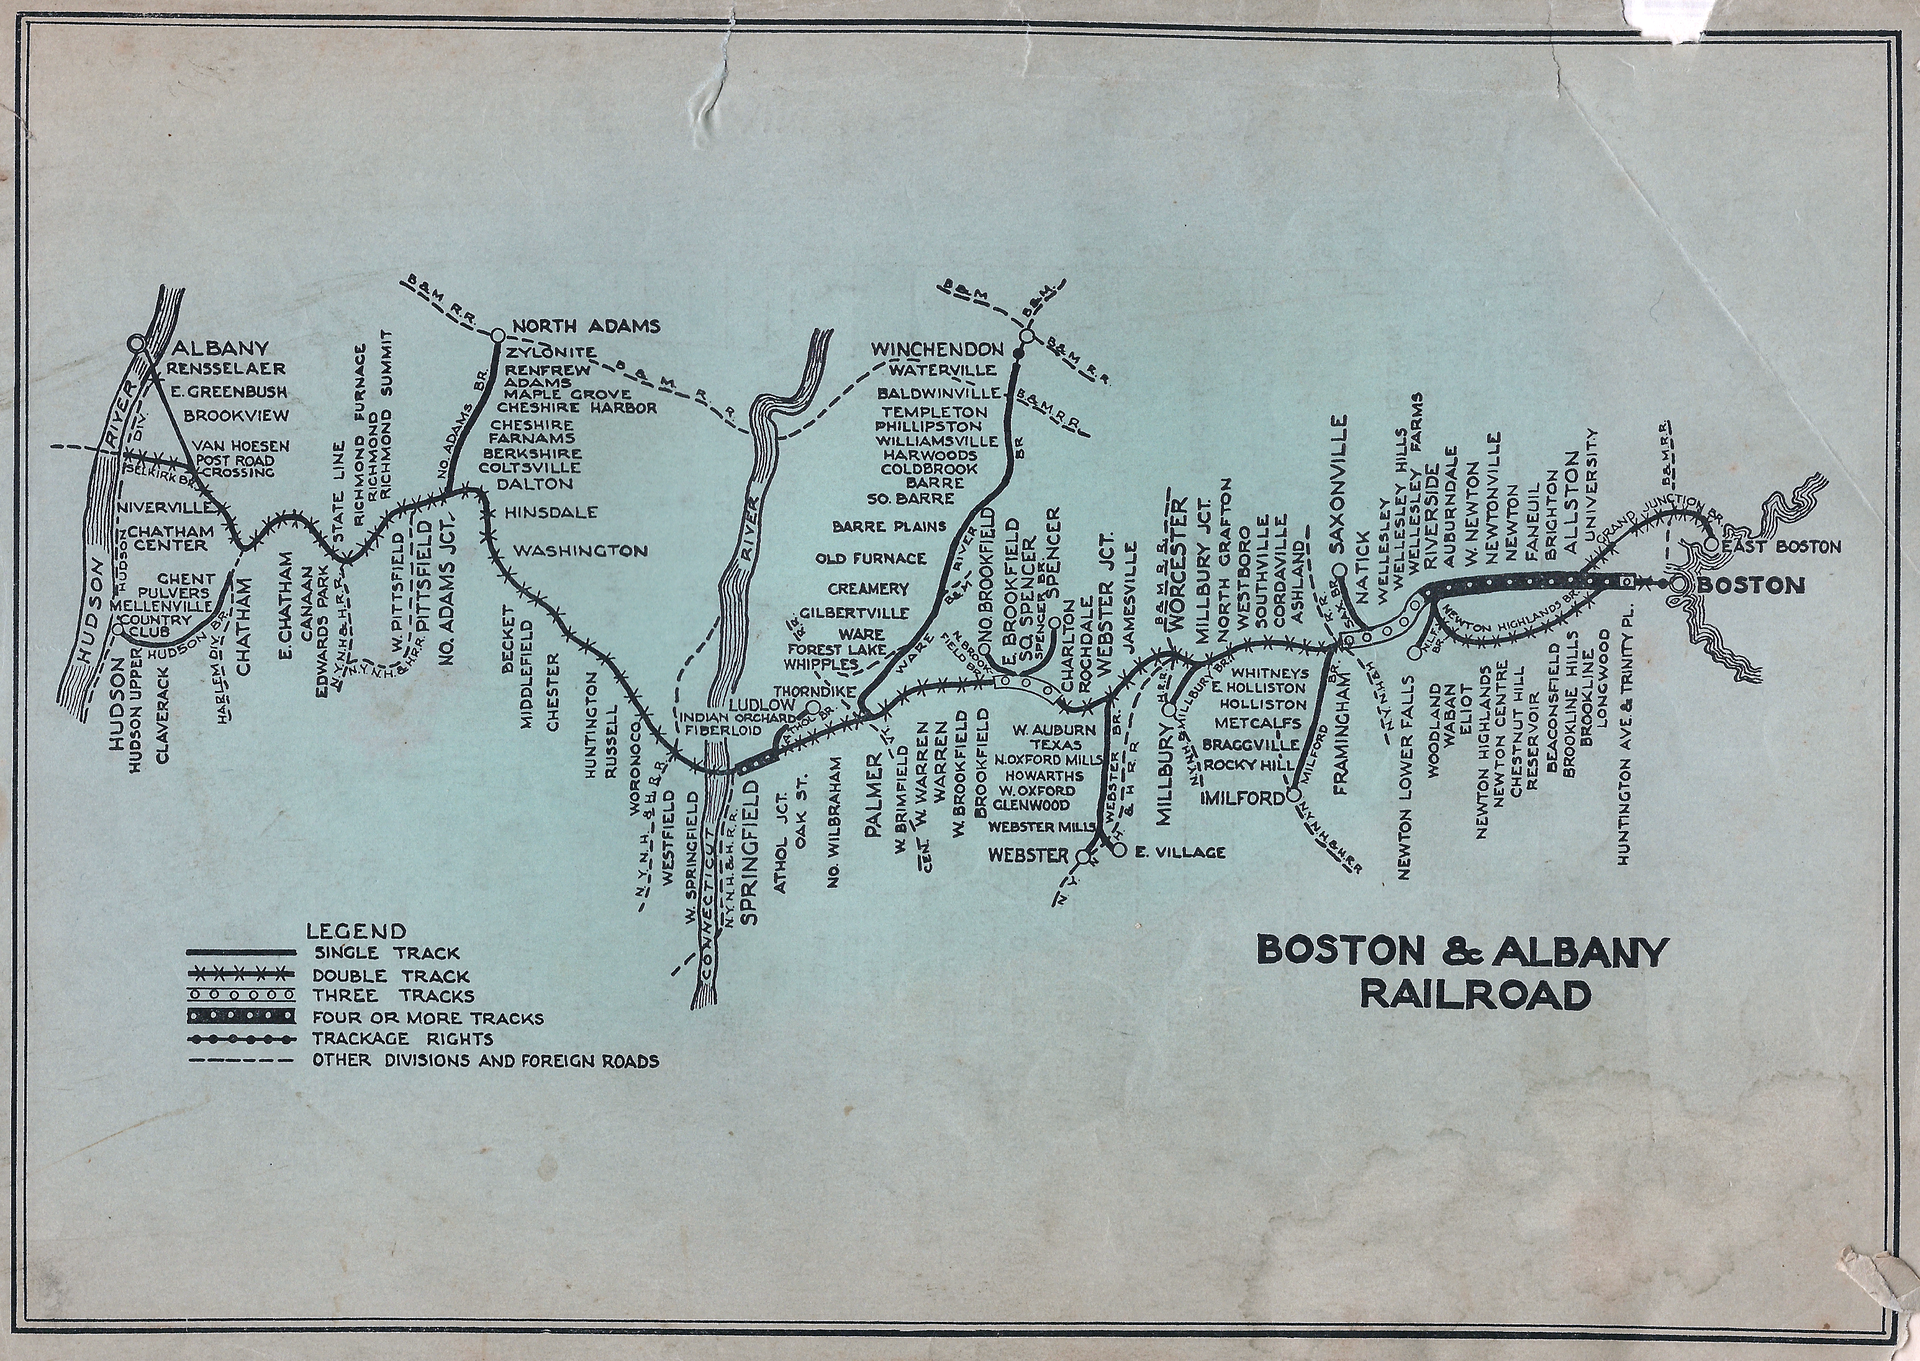 Boston and Albany railroad system map shows lines and stations running west to east across Massachusetts.